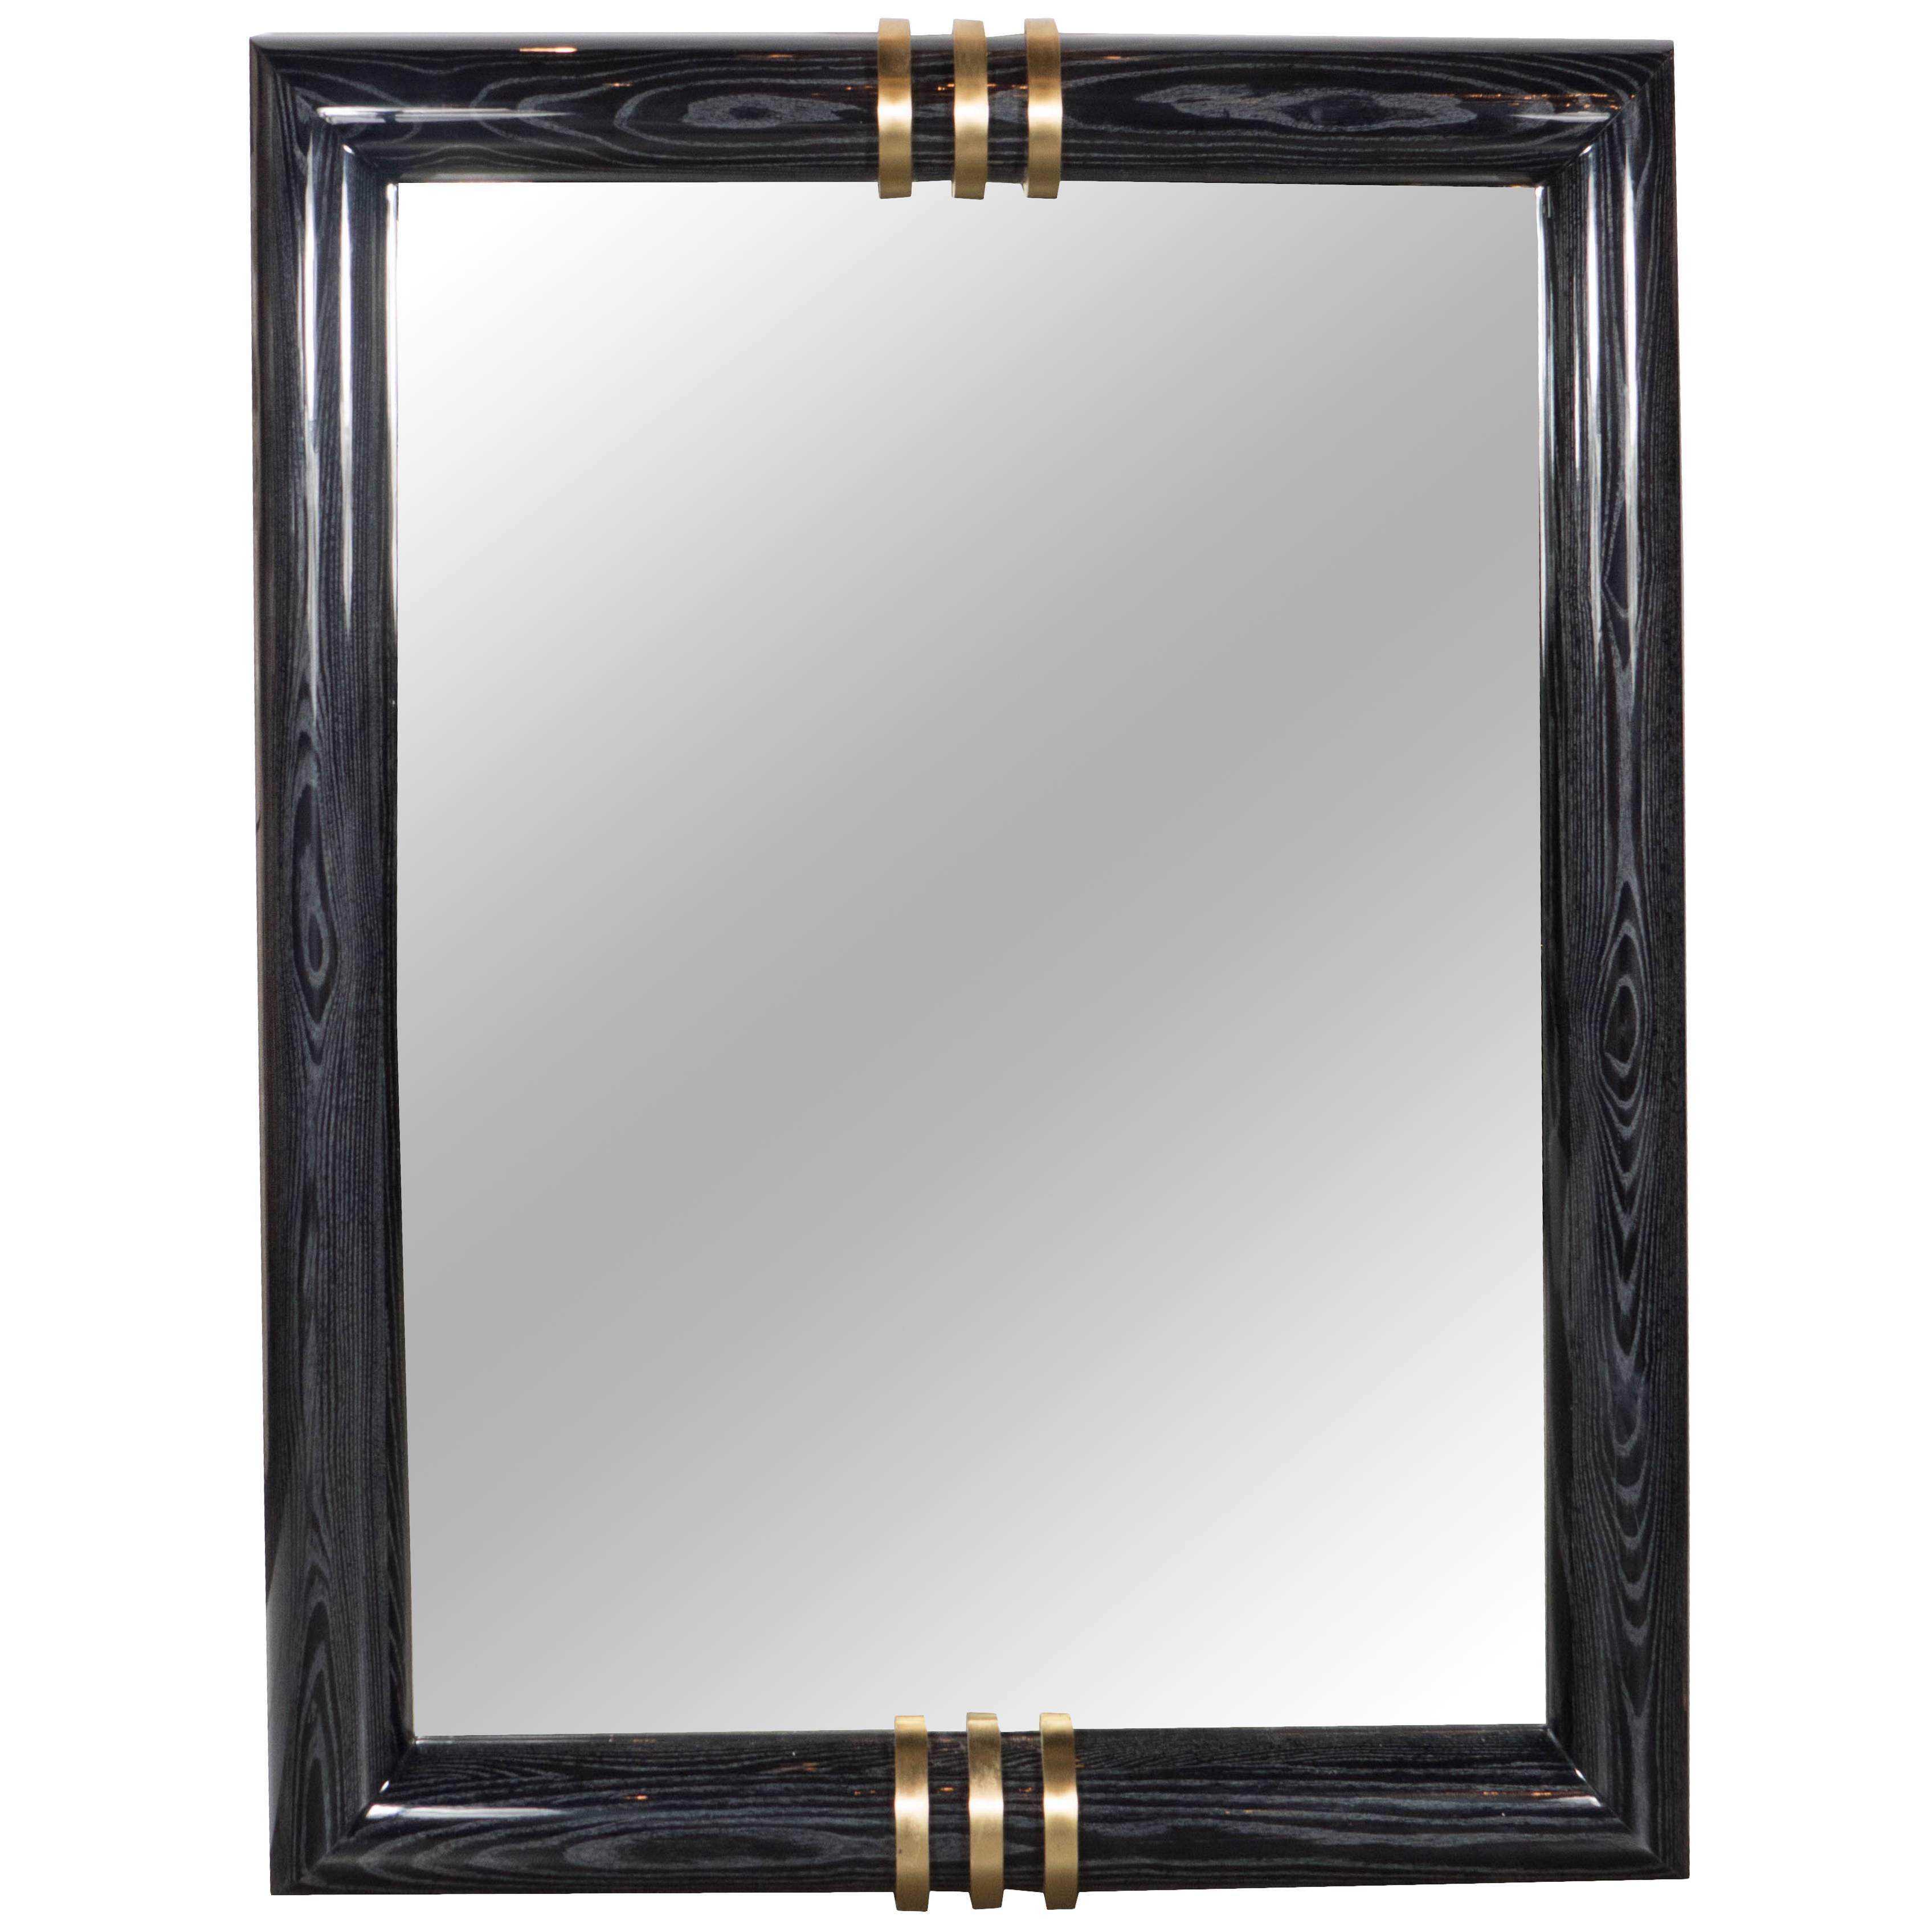 Gorgeous Art Deco Style Silver-Cerused Mirror with Brushed Brass Detailing